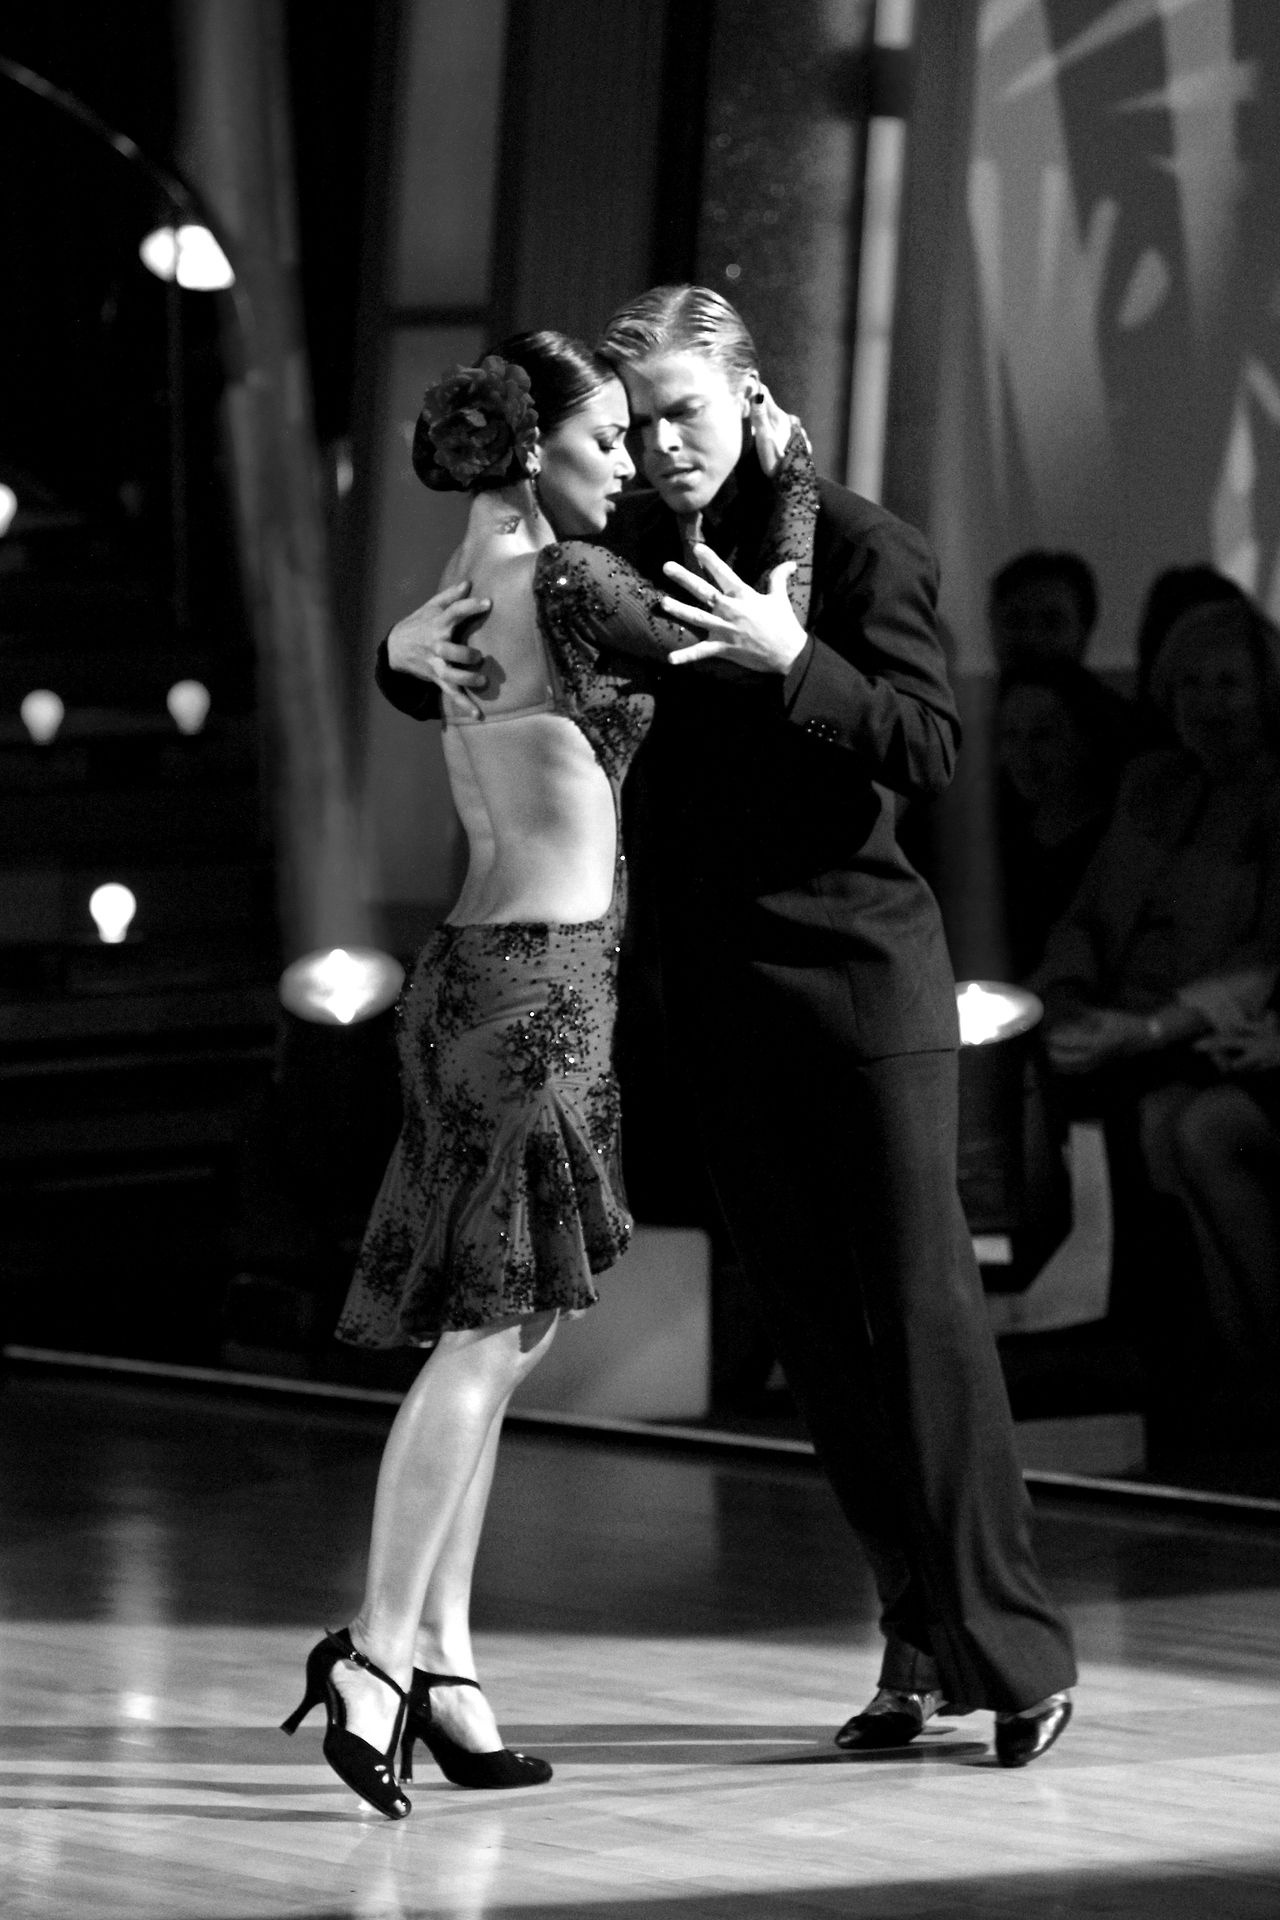 Argentine Tango: Monochromic, Ballroom dancing, A style of dance as sexy as it is passionate, Latin dance. 1280x1920 HD Background.